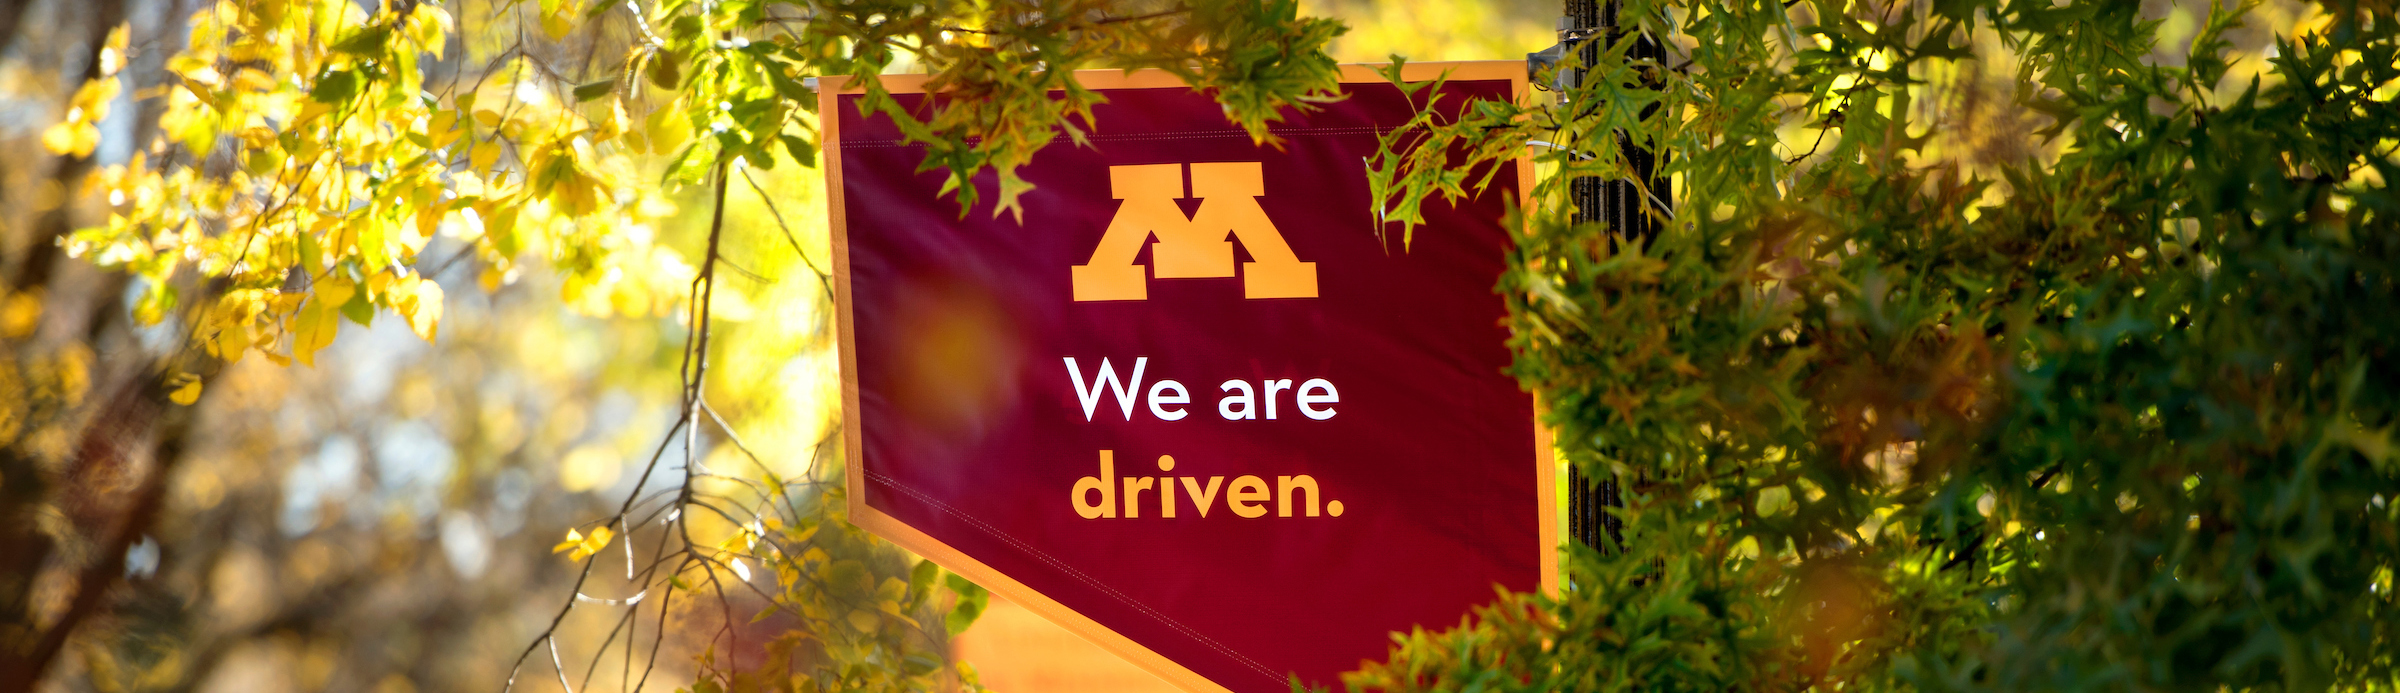 This is a photo of a UMN banner on campus that says "We Are Driven"